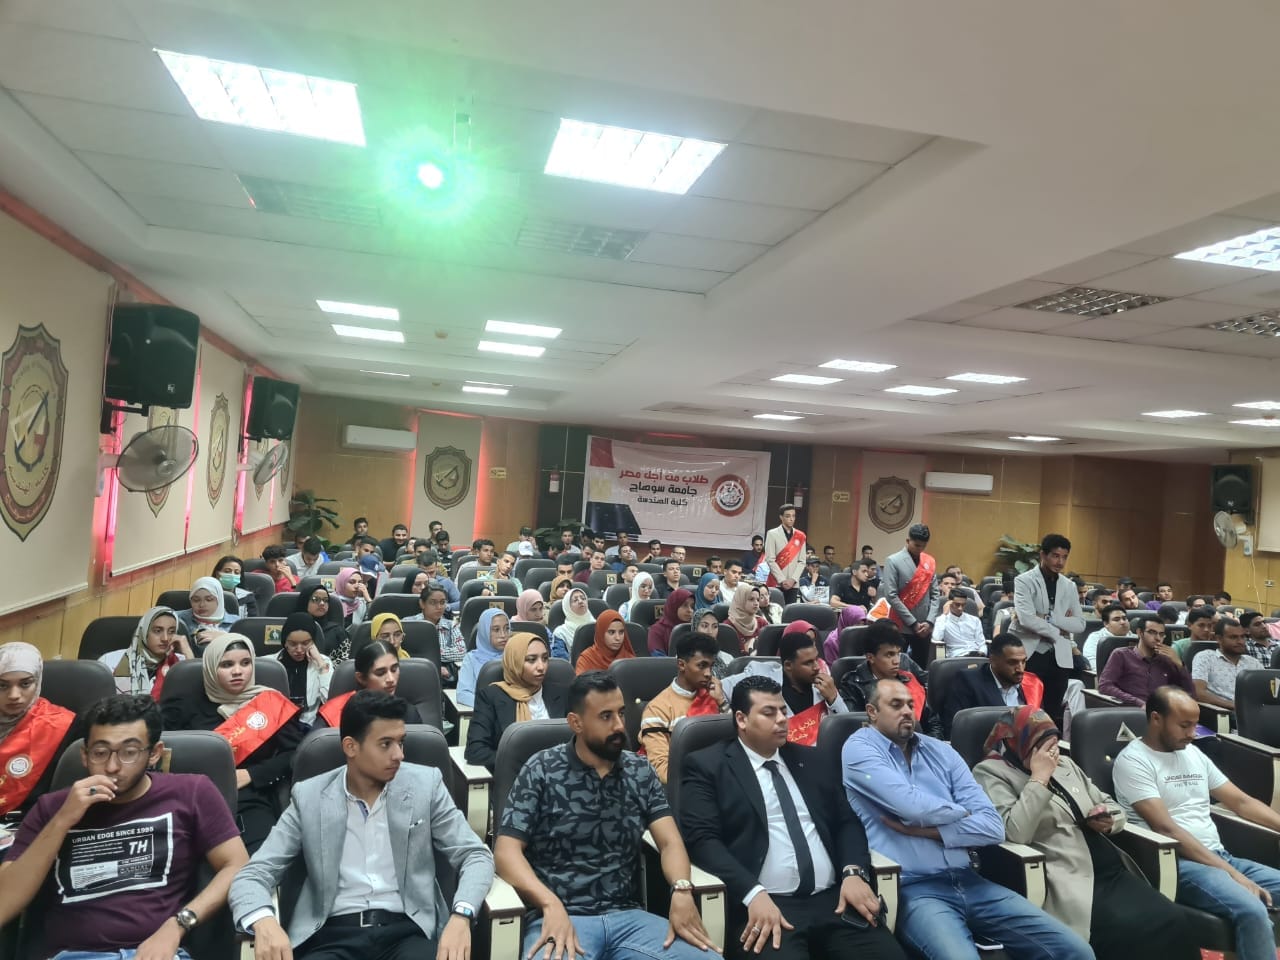 Students for Egypt union at faculty of Engineering organize a symposium about climate change in light of Egypt’s hosting of the Conference of Parties Cop27*